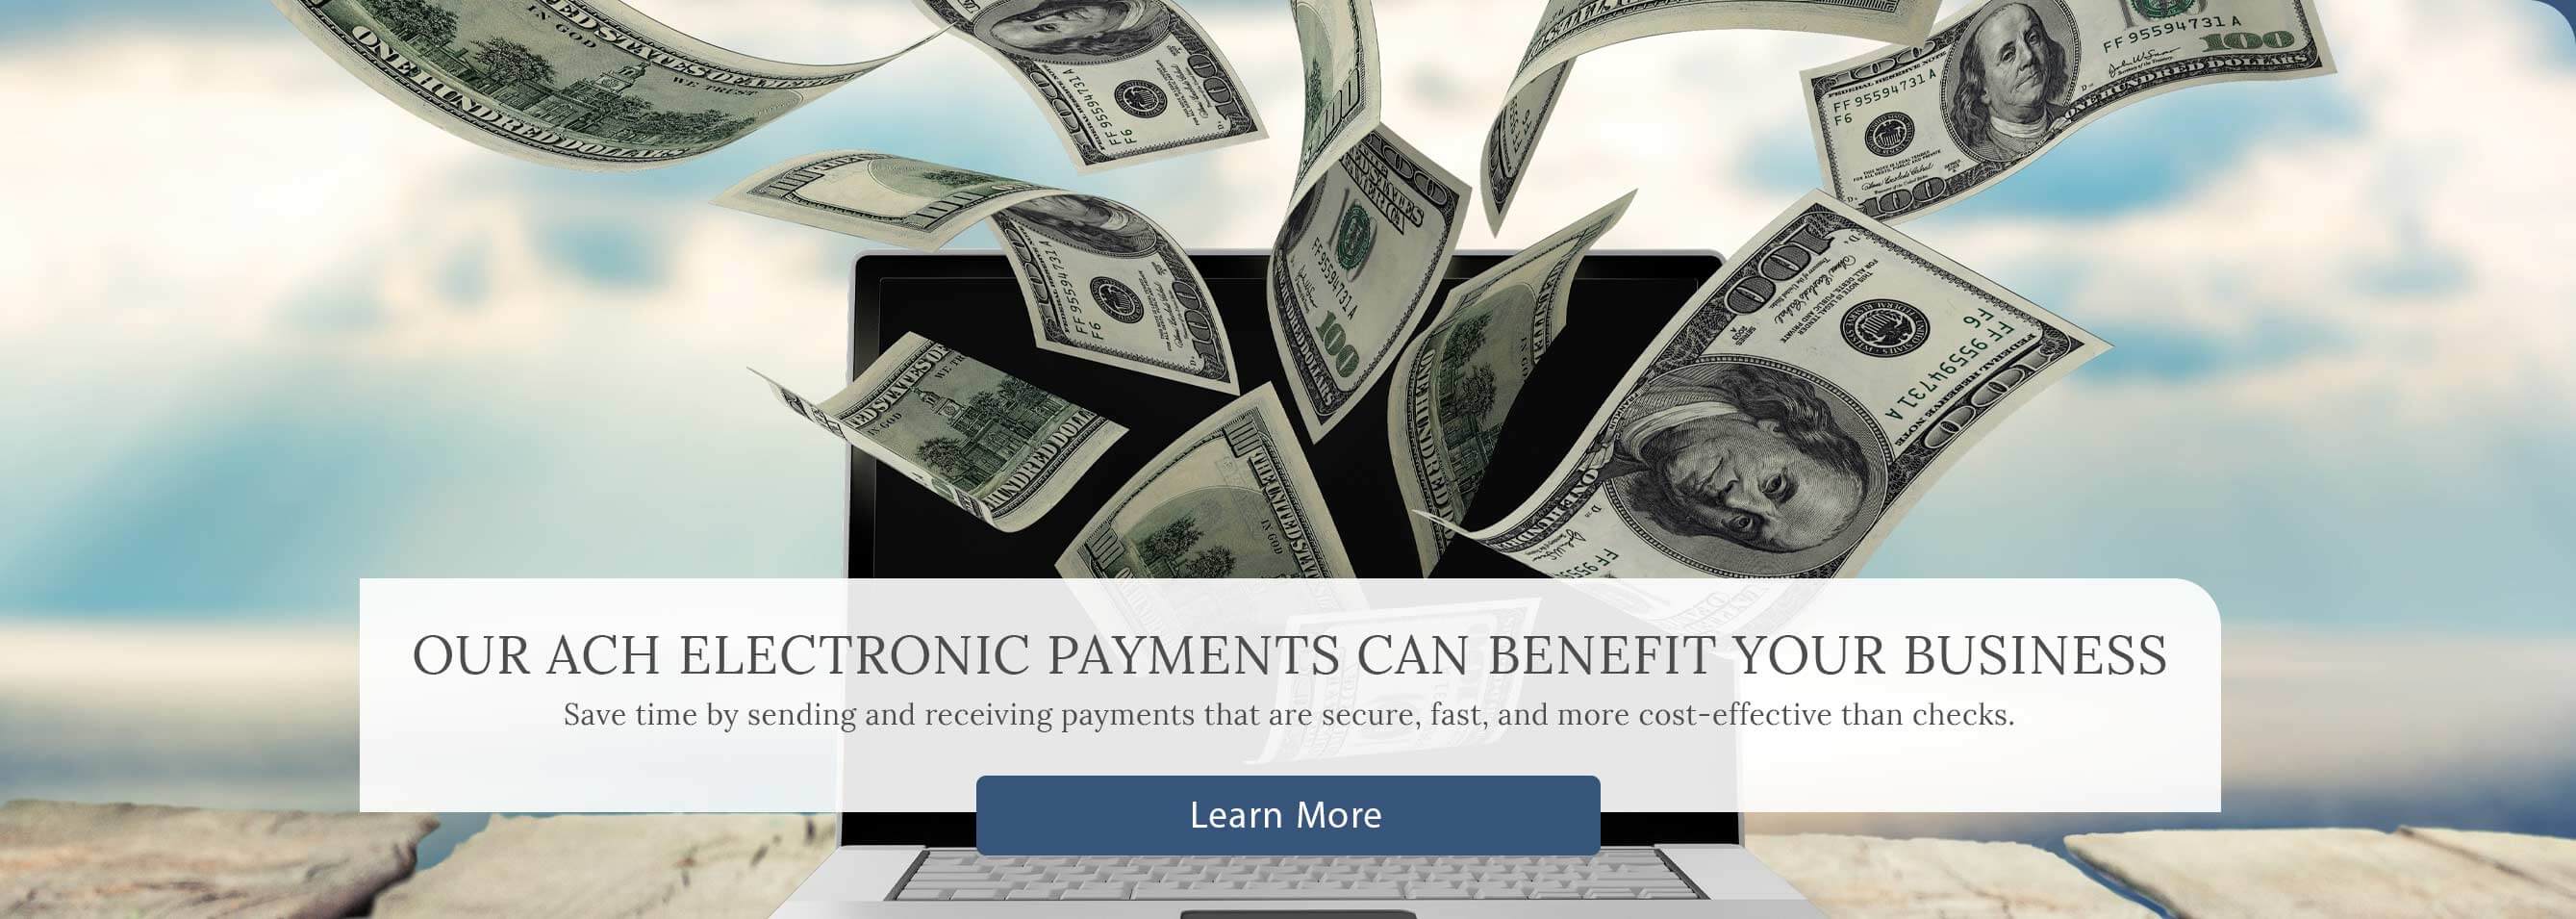 Our ACH Electronic Payments Can Benefit Your Business. Save time by sending and receiving payments that are secure, fast, and more cost-effective than checks. - Learn More - 